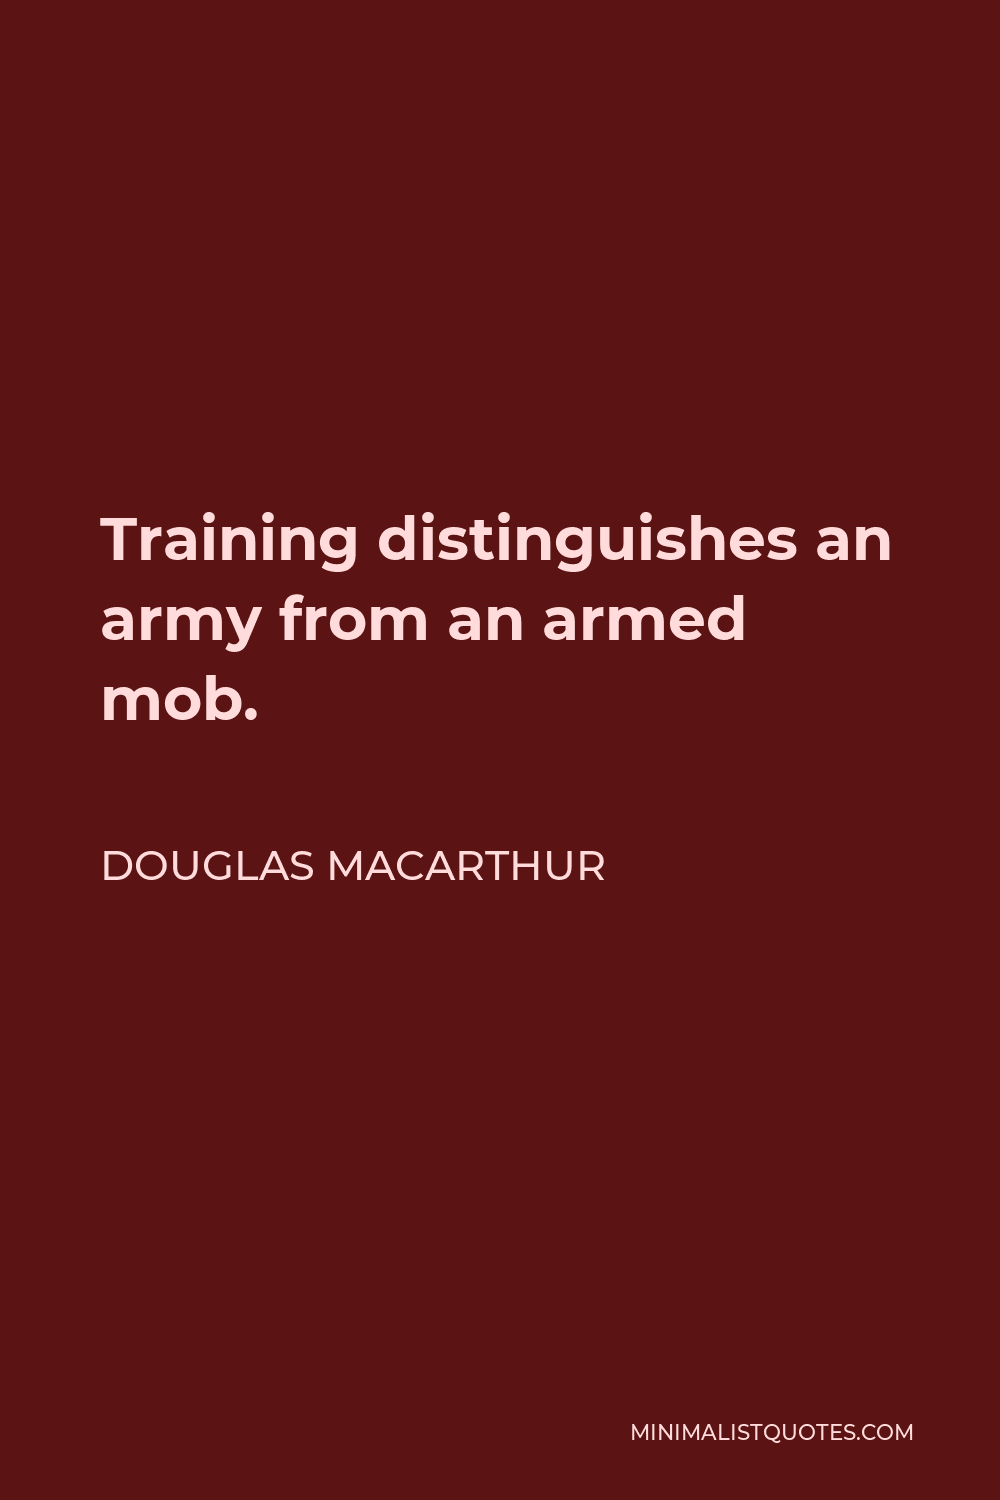 Douglas MacArthur Quote - Training distinguishes an army from an armed mob.